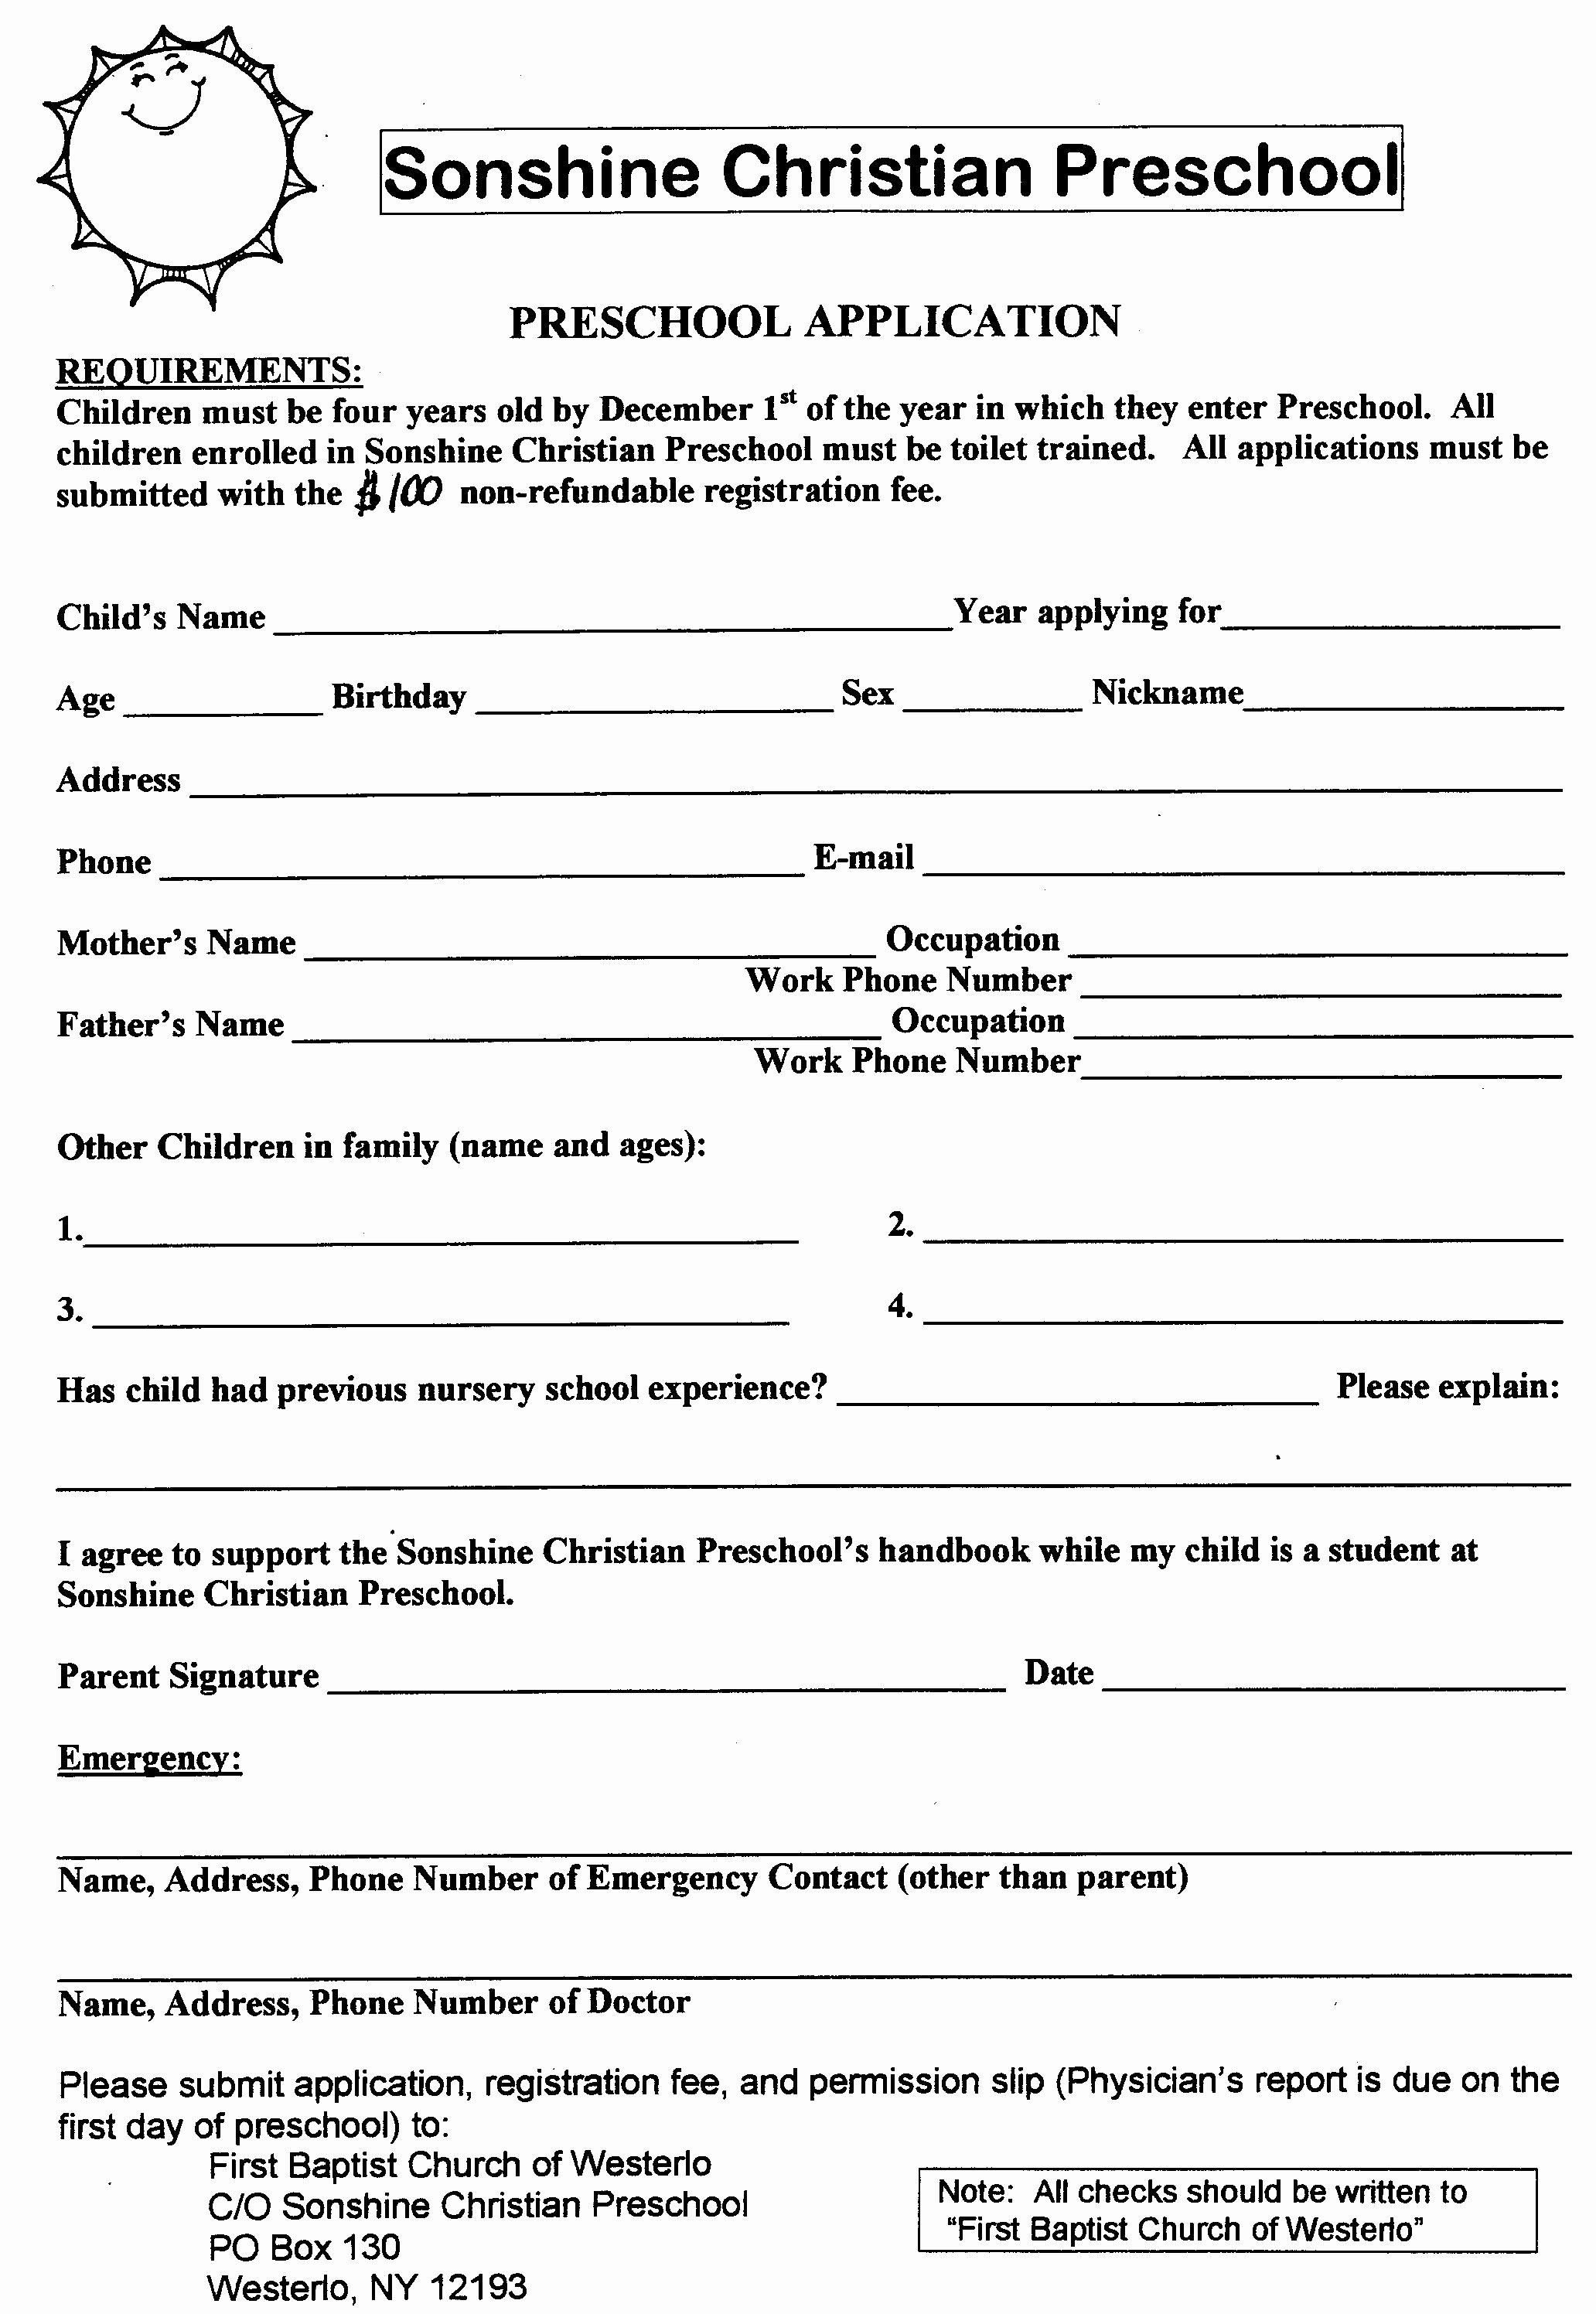 Free Church forms Printable Fresh Printable Daycare Applications